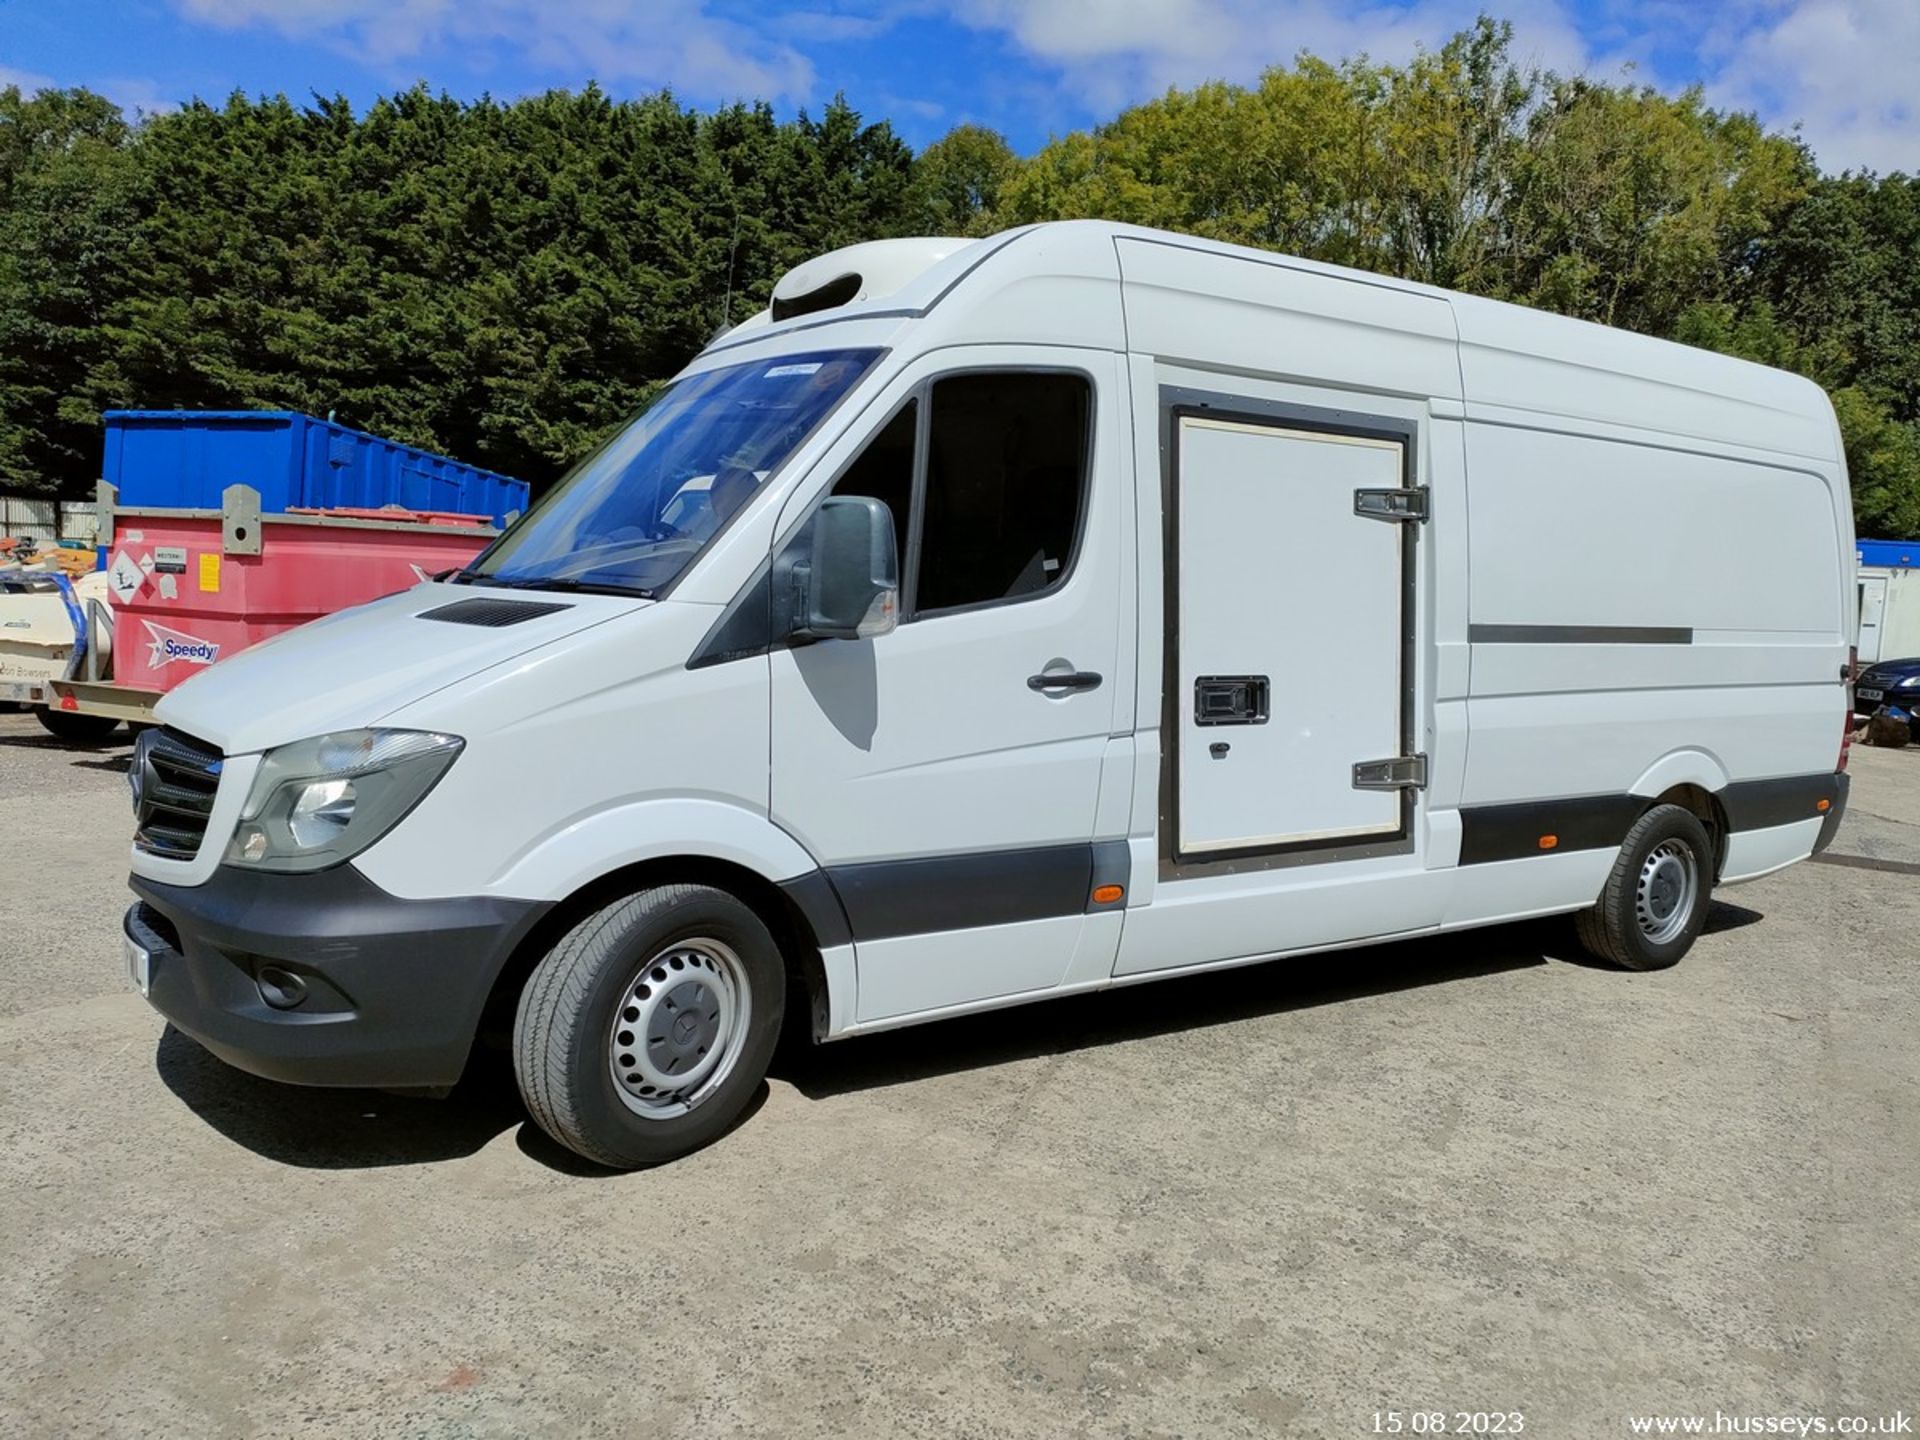 18/68 MERCEDES-BENZ SPRINTER 314CDI - 2143cc 5dr Refrigerated (White) - Image 2 of 40